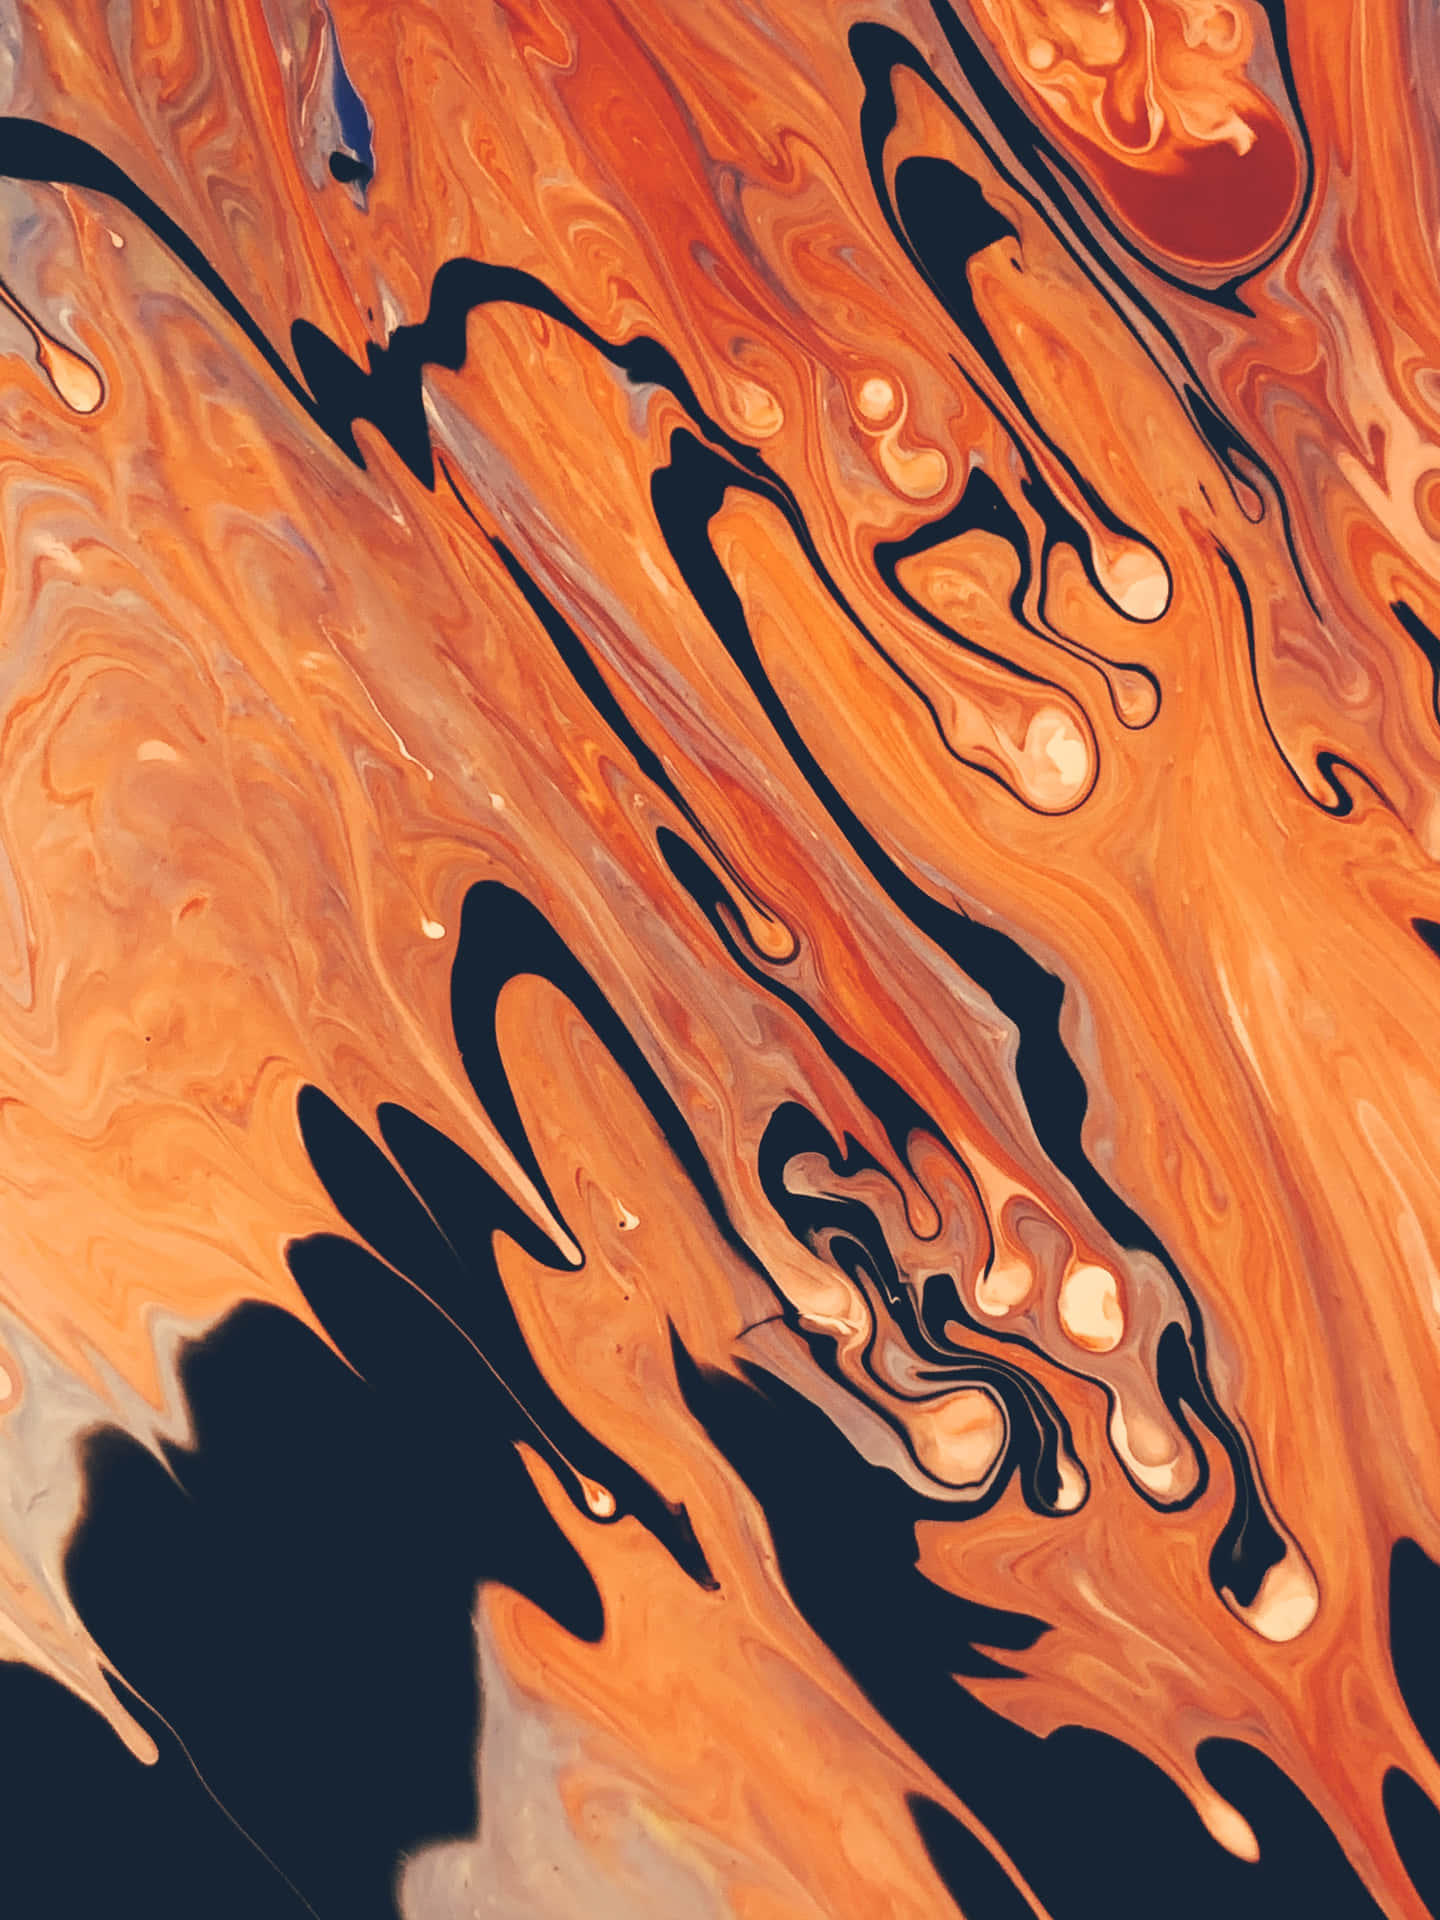 An Orange And Black Liquid Painting On A Black Background Wallpaper